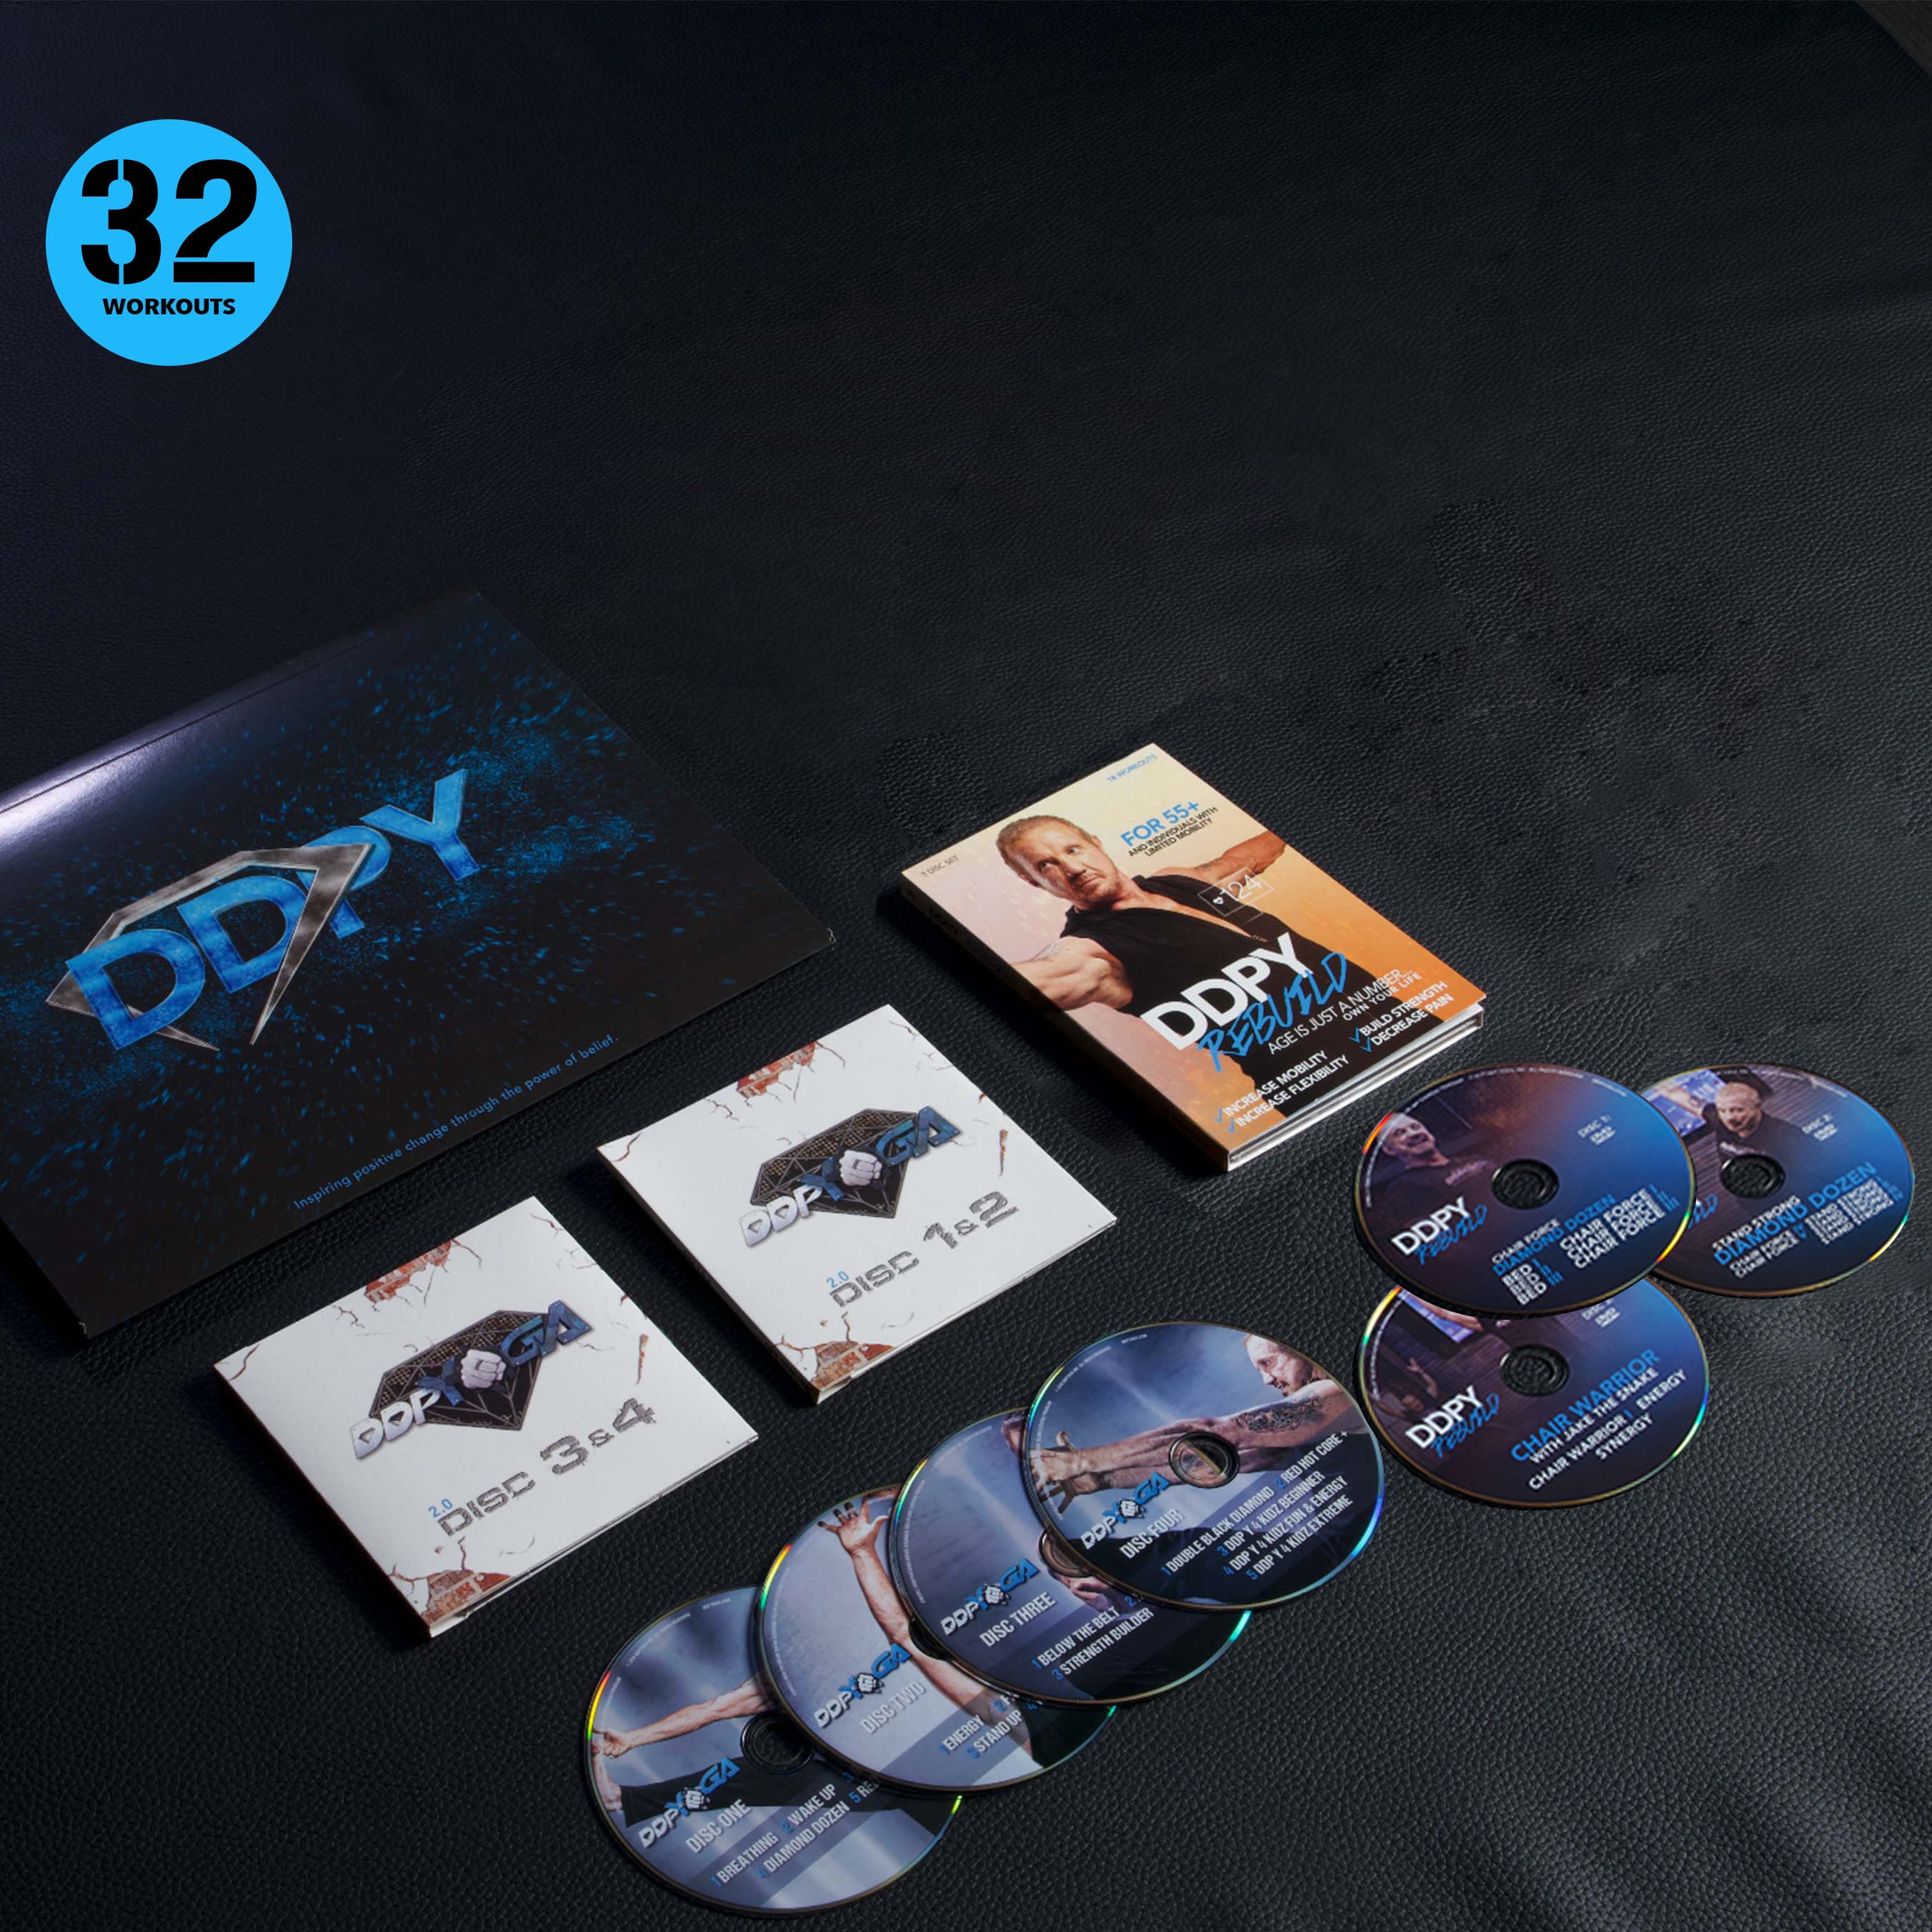 DDPY on X: 😃 Our #LaborDay Sale is happening NOW! Use the Coupon Code:  LABORDAY2022 for 25% off All DVDs or a 1 Year Subscription to the App  starting RIGHT NOW through